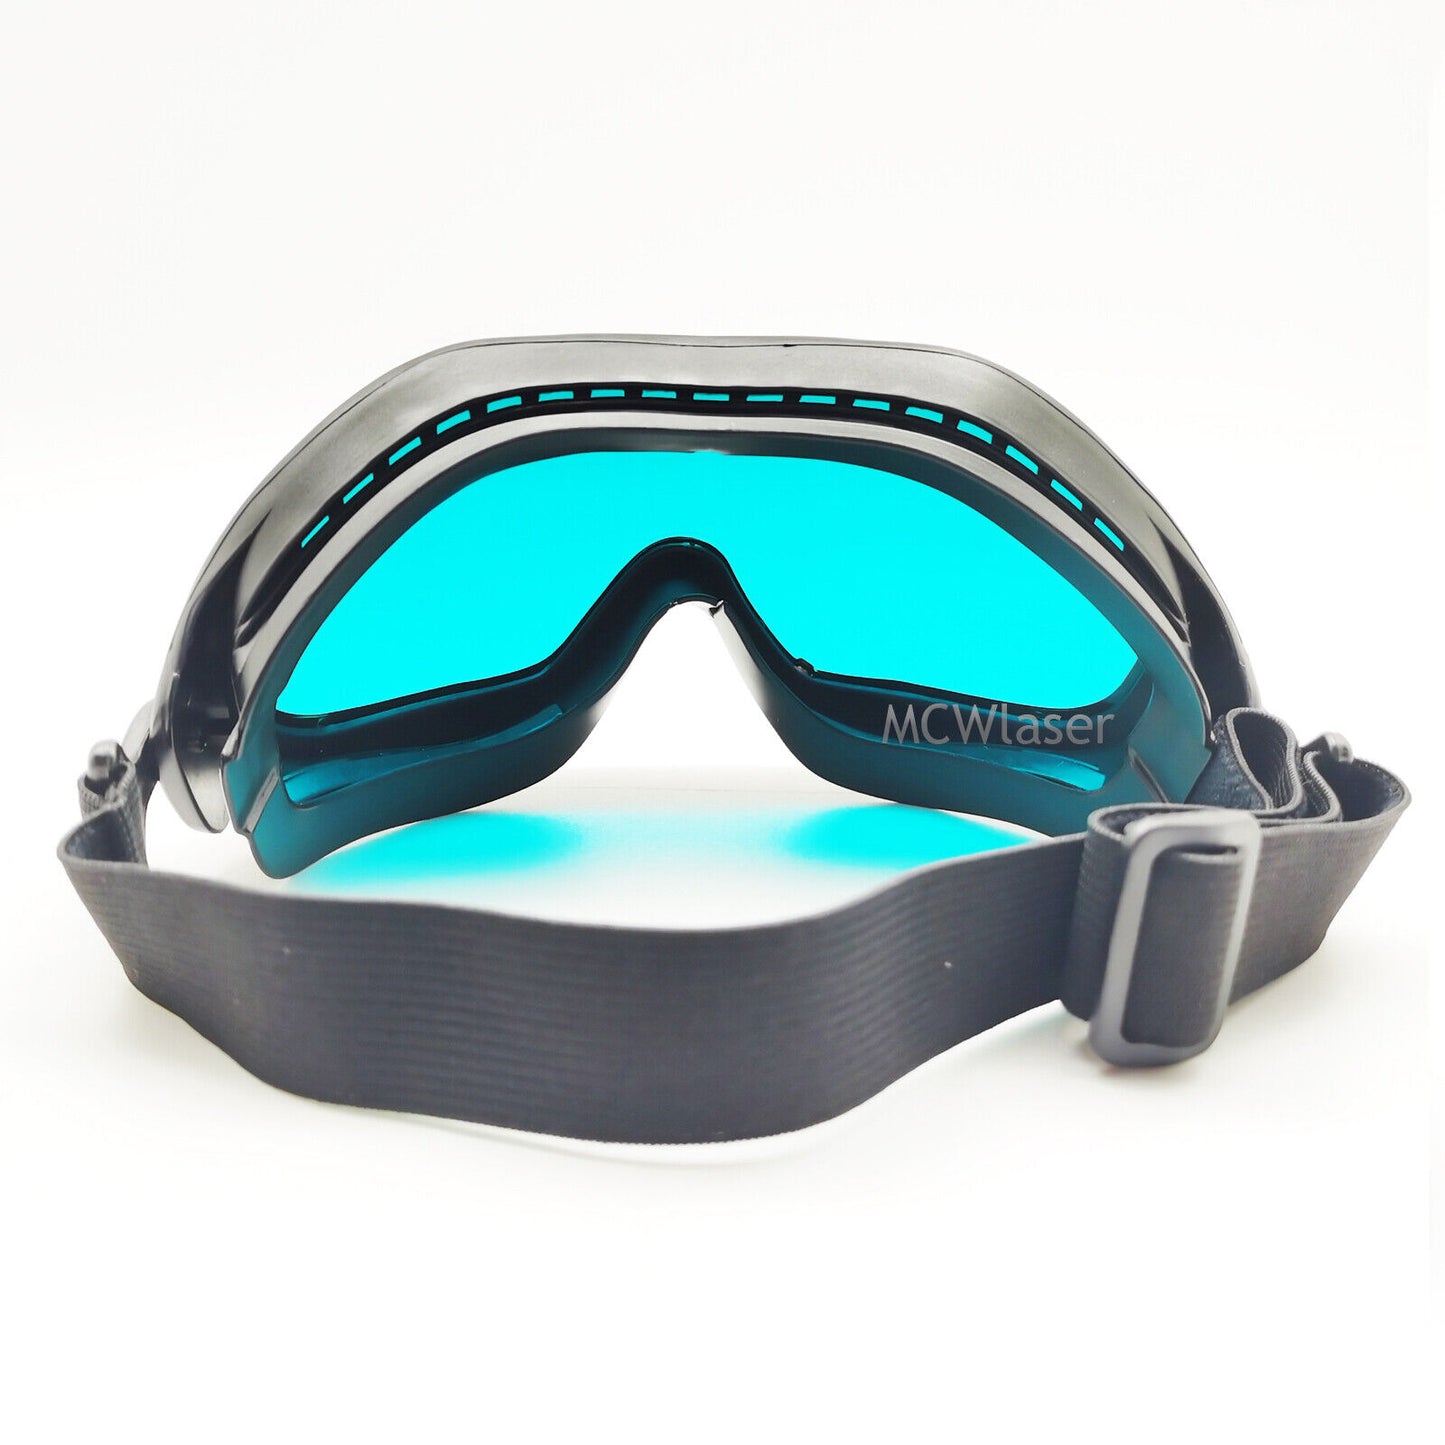 CO2 Laser Goggle For 10600nm Laser Protection Safety Glasses EP-4